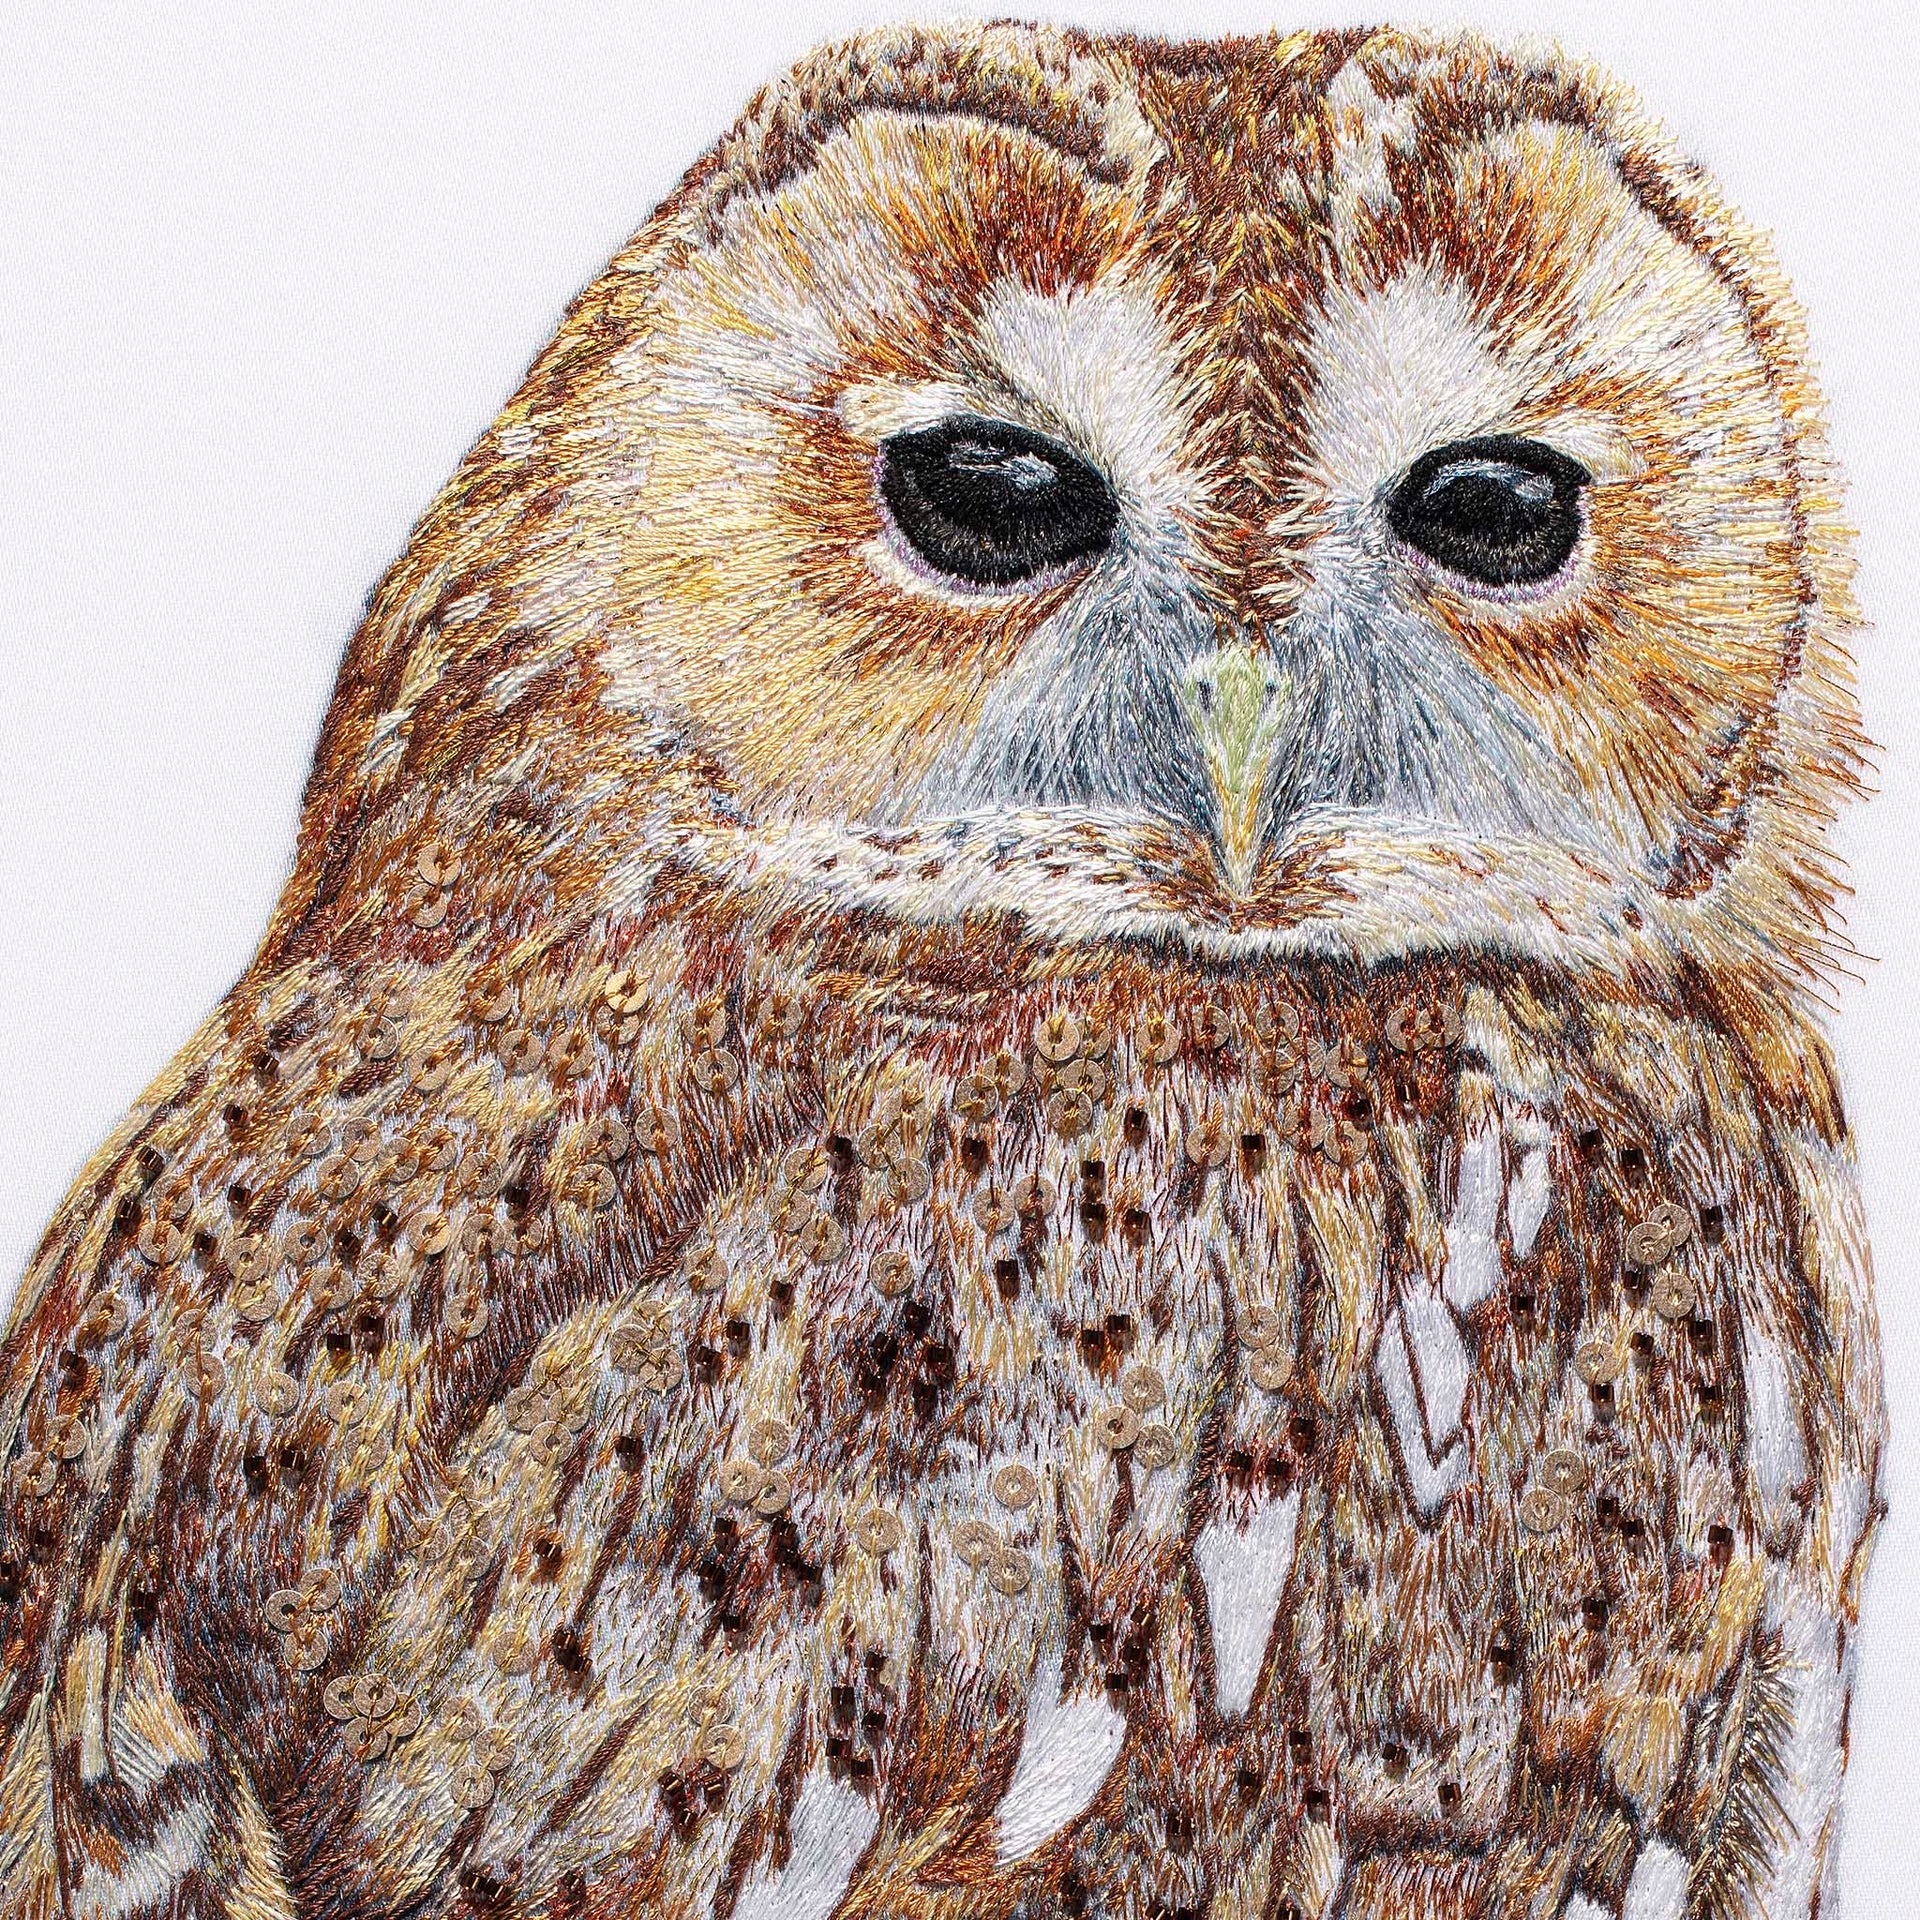 Owl pencil drawing with hand embroidery and beading artwork close up